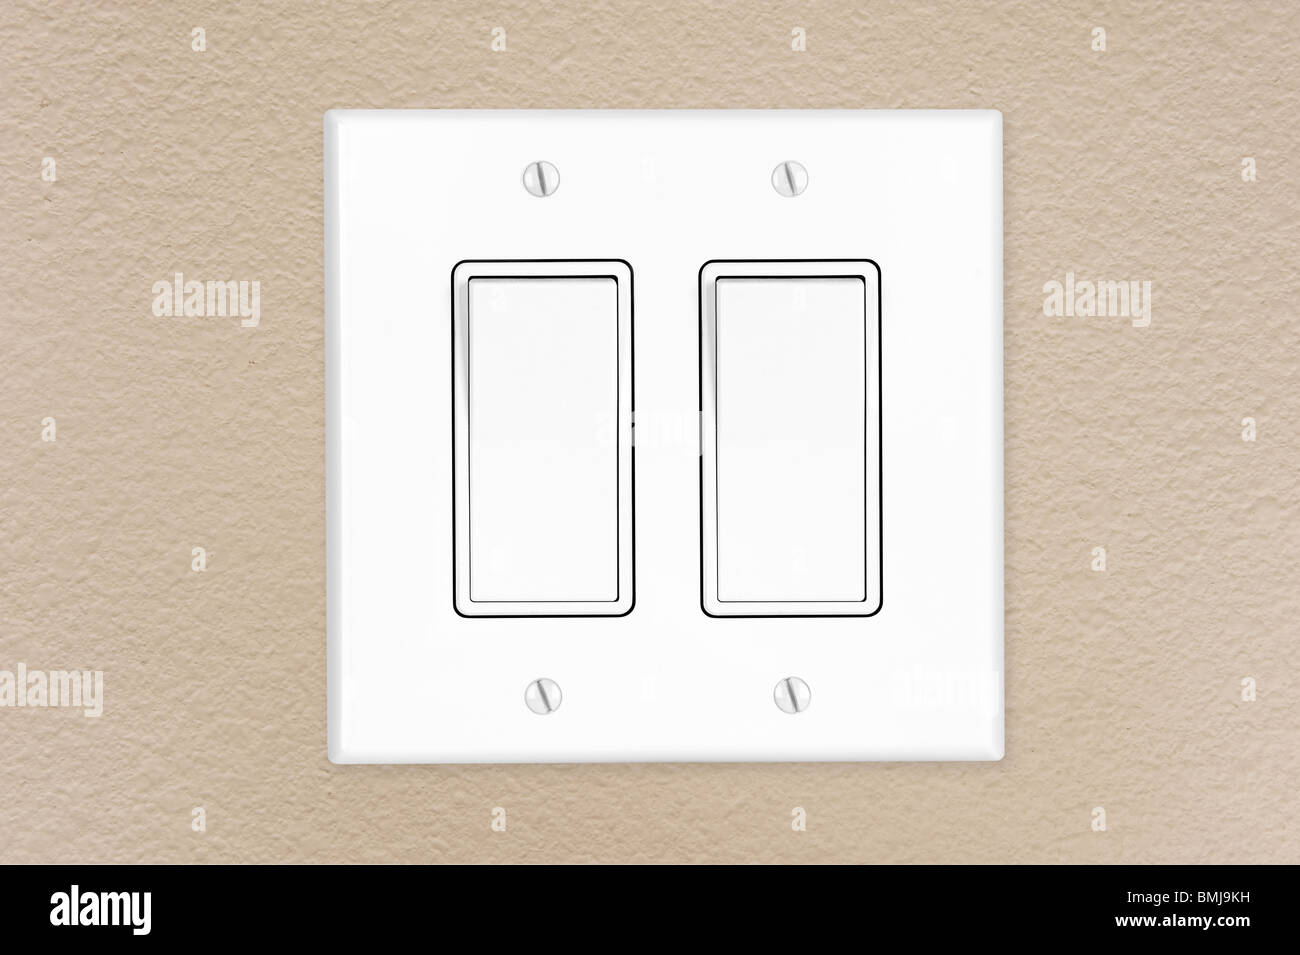 A brand new modern electrical toggle light switch on a freshly painted wall. Stock Photo